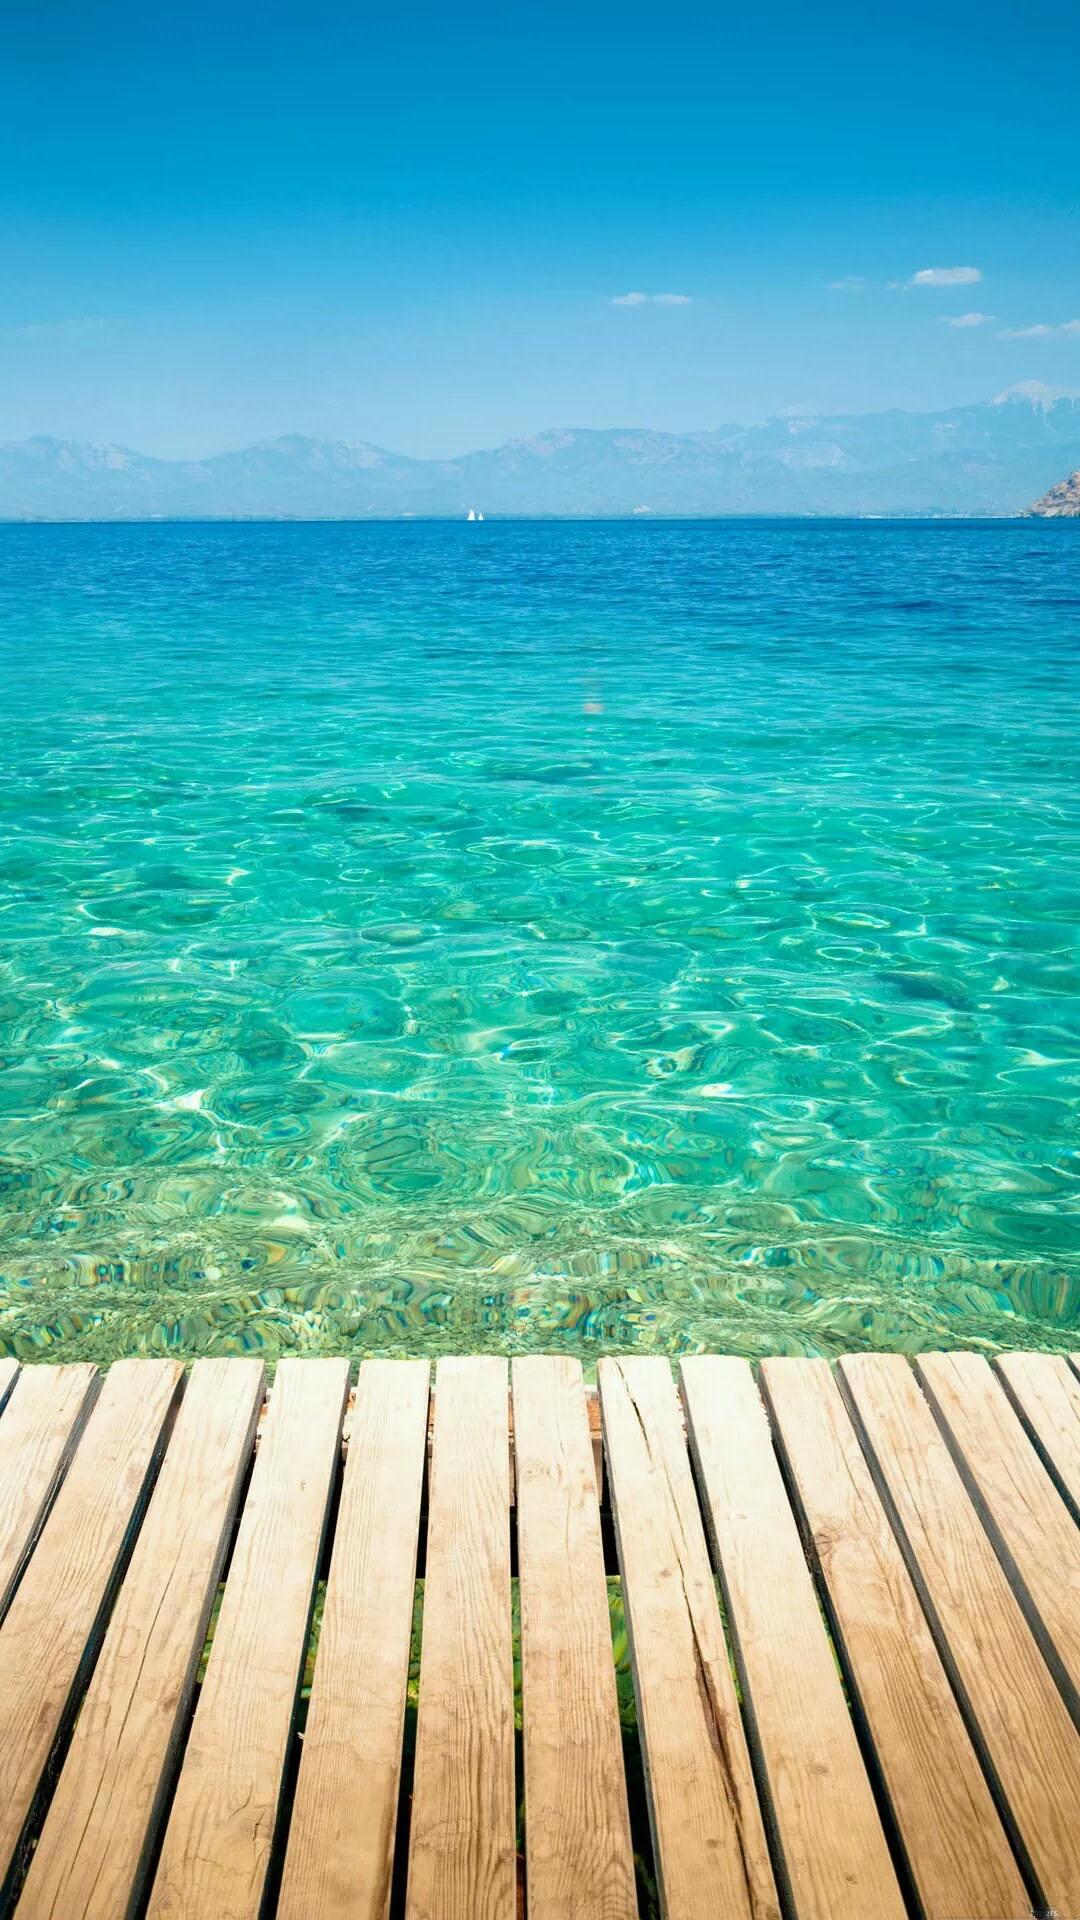 Wooden Dock Transparent Sea Water android wallpaper